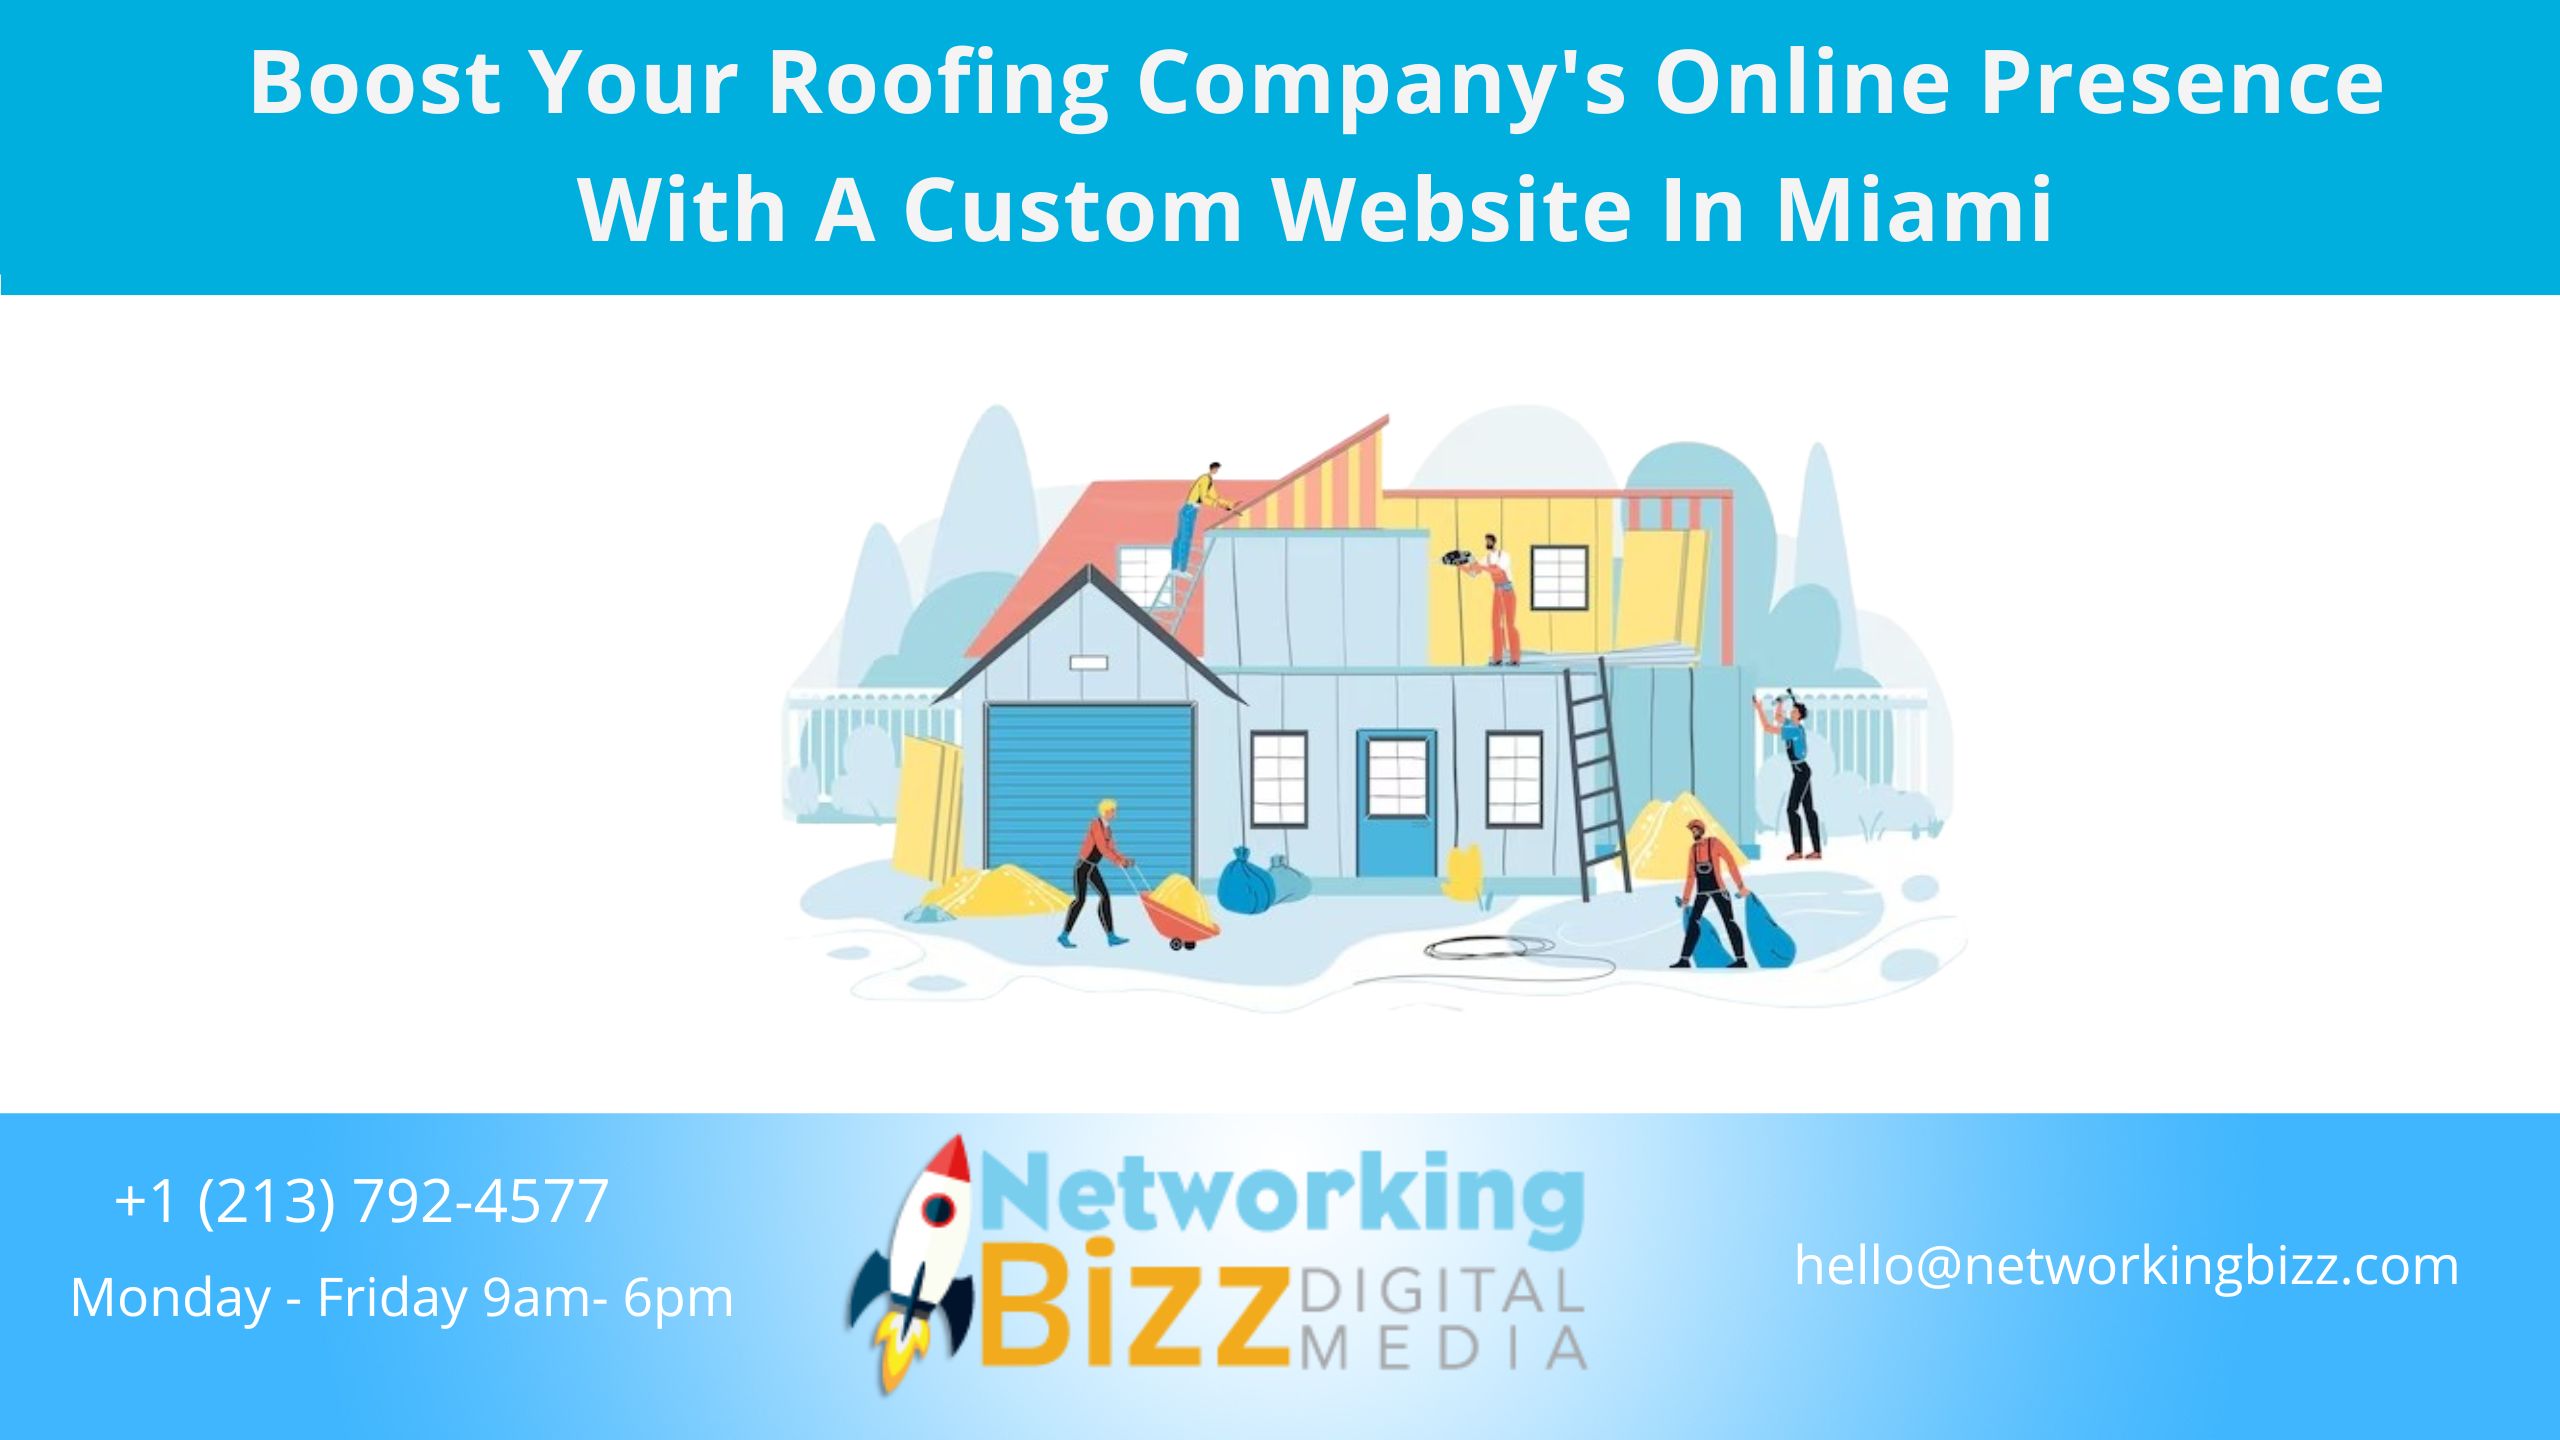 Boost Your Roofing Company’s Online Presence With A Custom Website In Miami